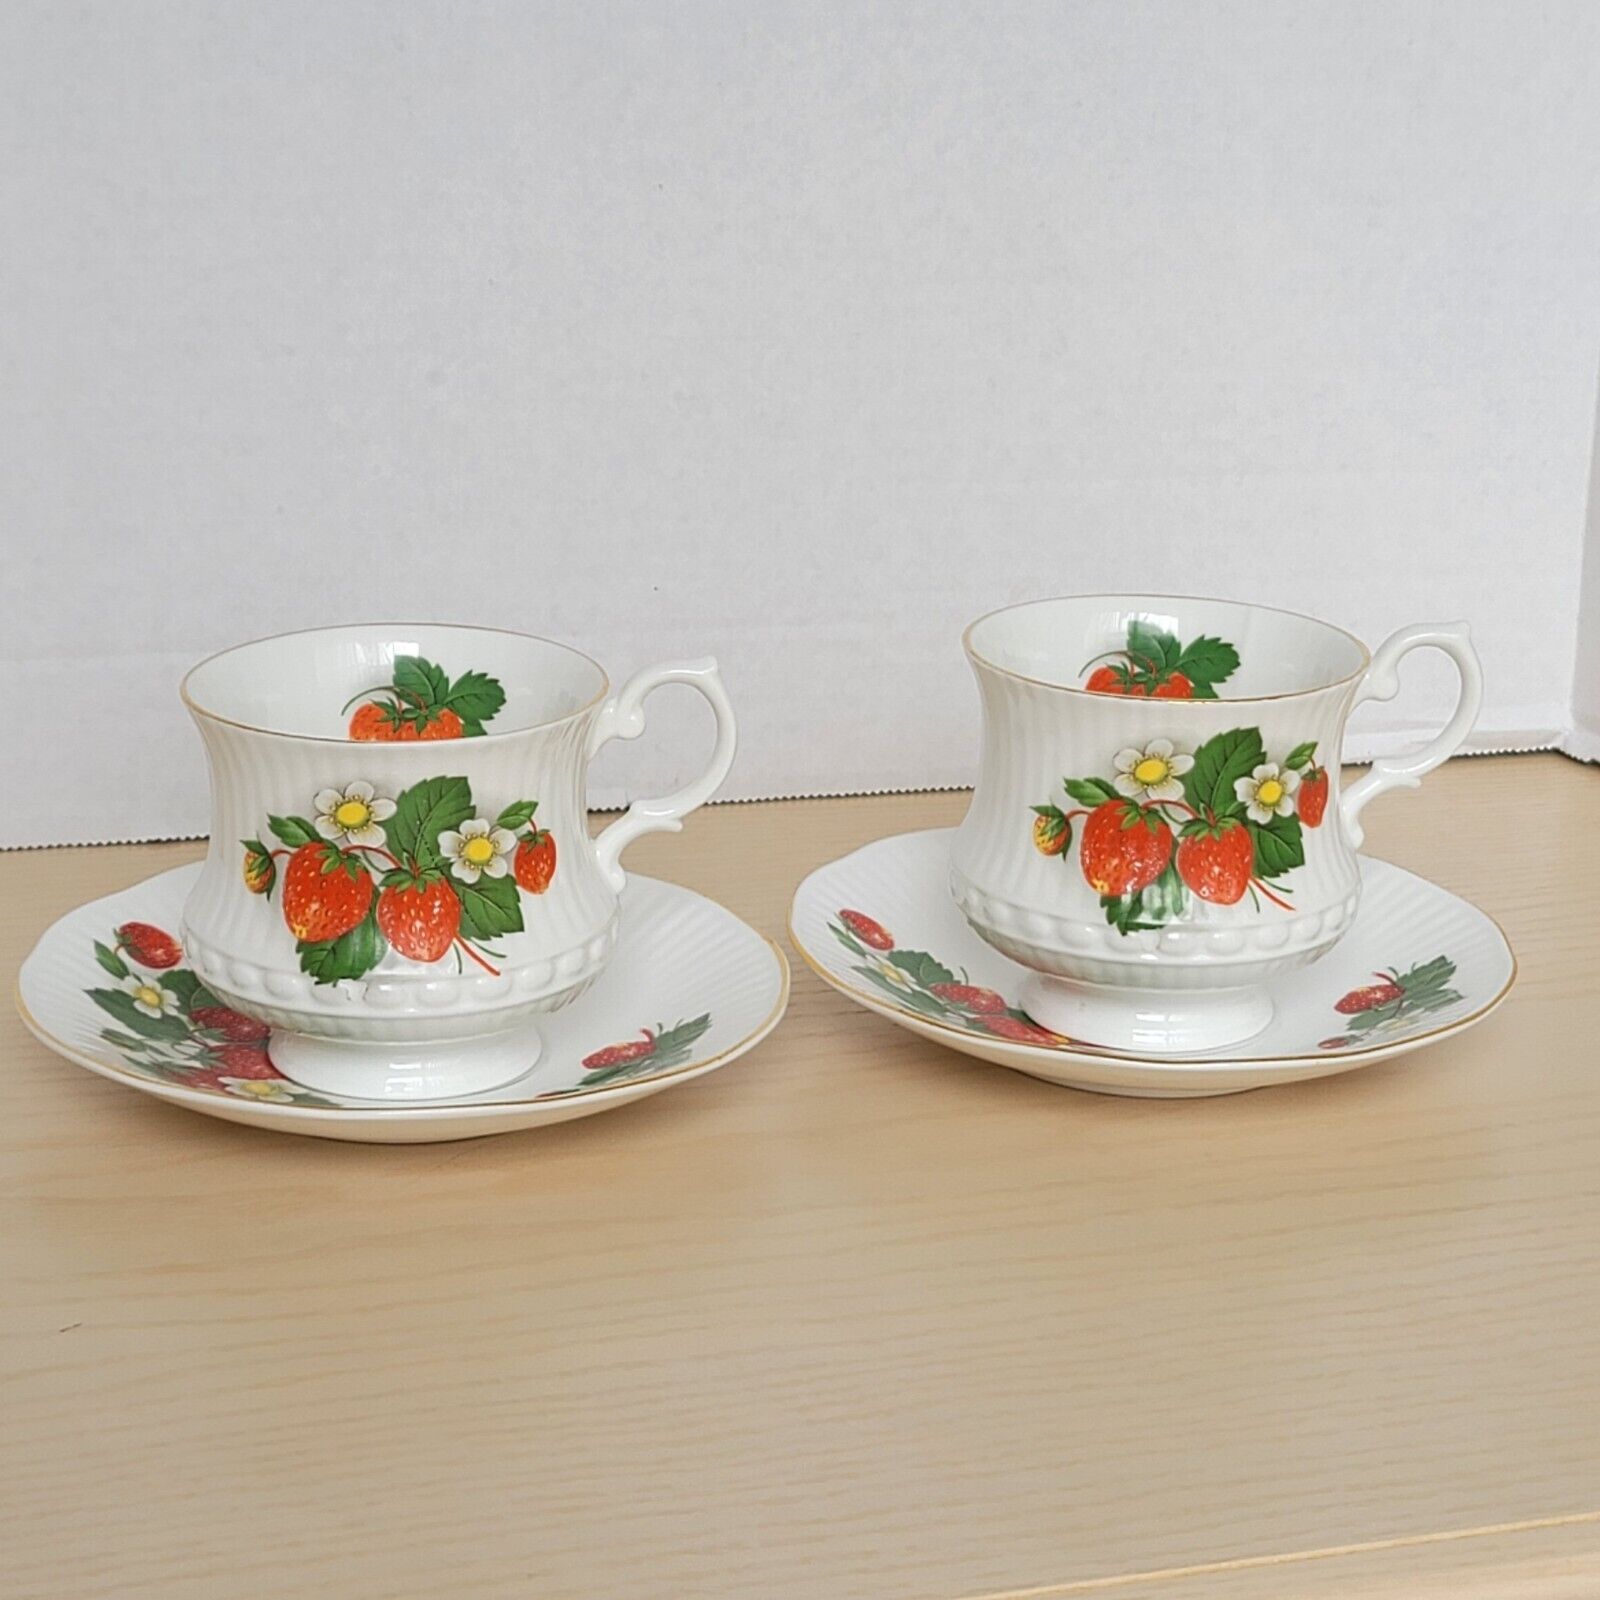 Queen's Staffordshire Fine Bone China England Strawberry Tea Cups and Saucers